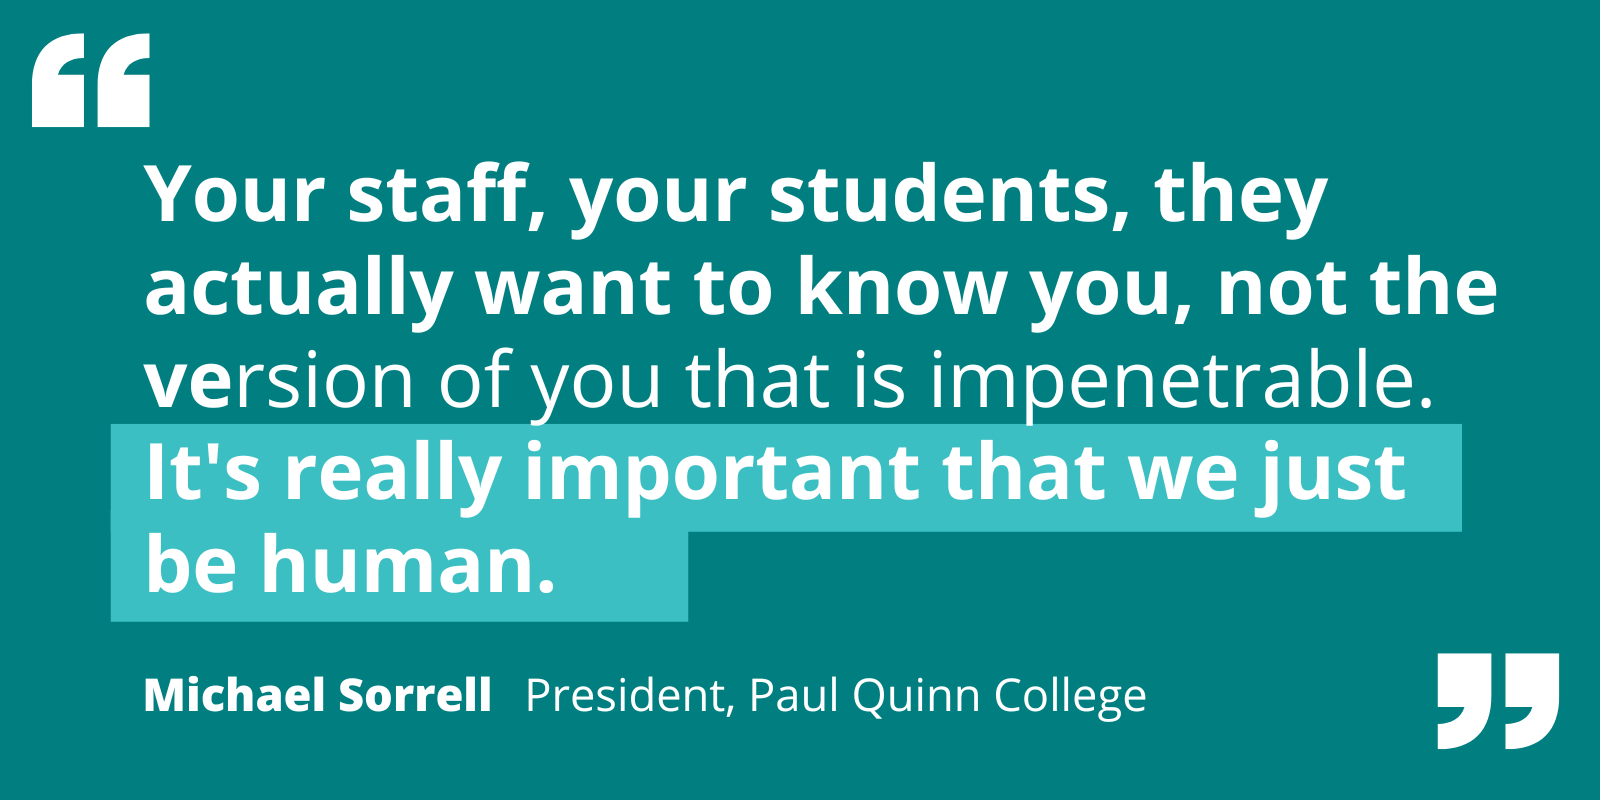 Quote by Michael Sorrell re: the importance of higher ed leaders showing their true self to staff and students.